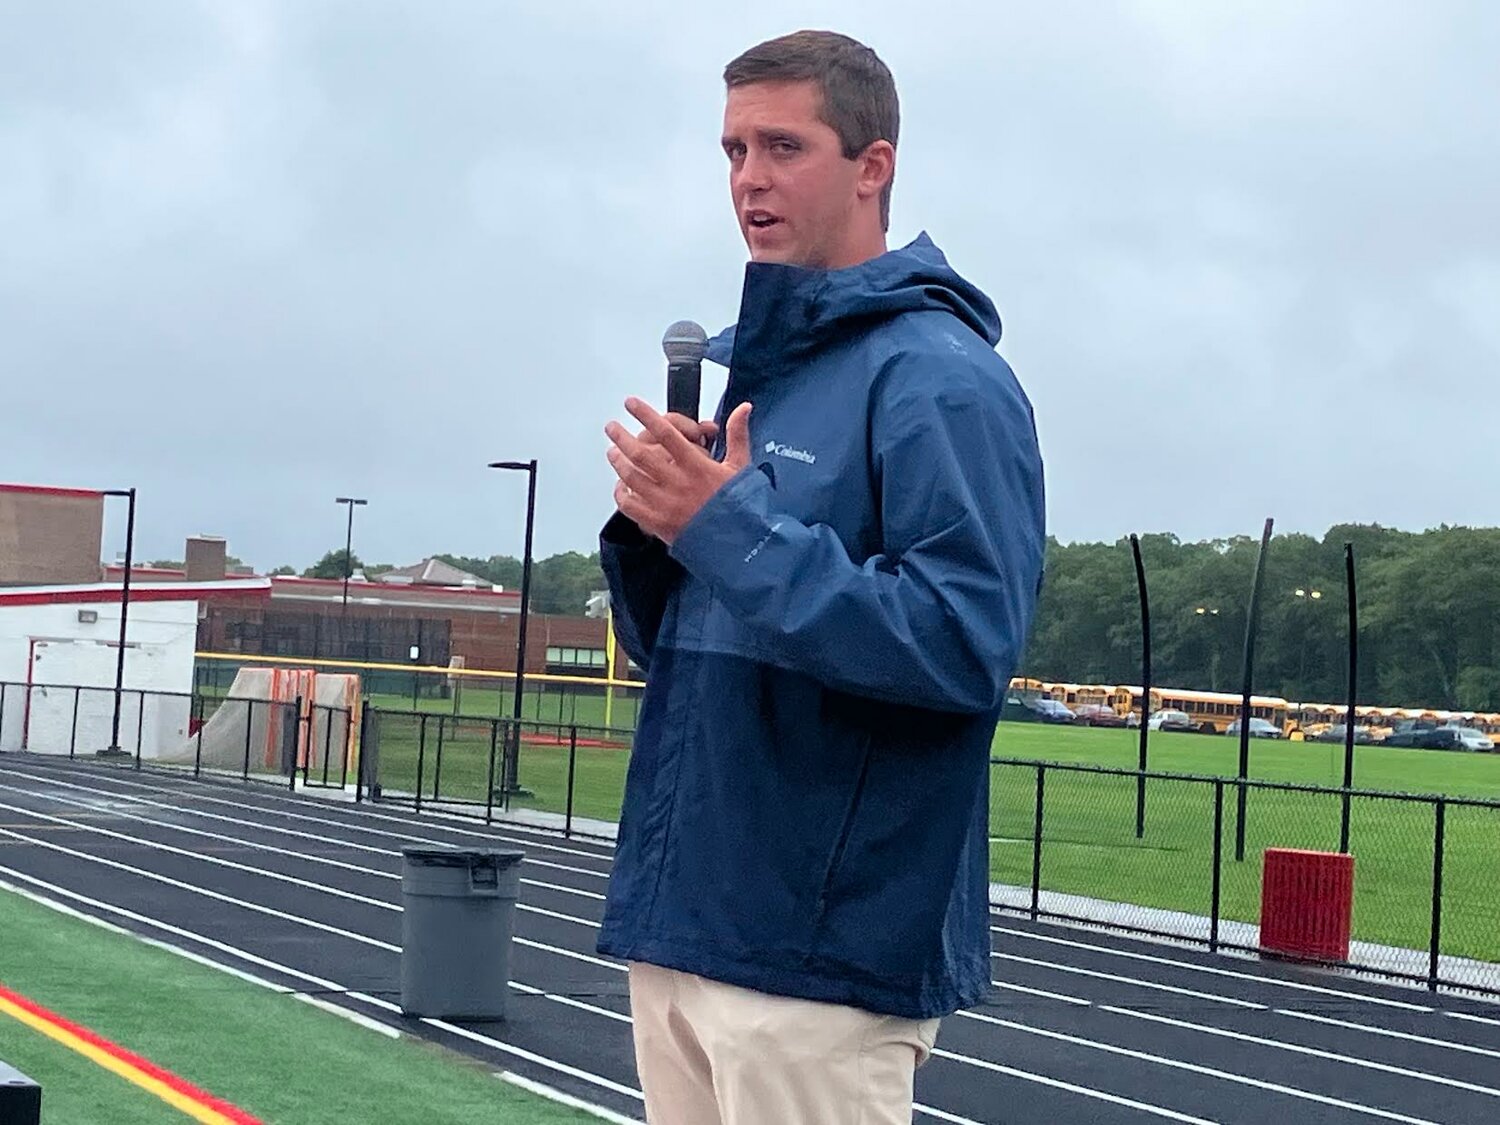 Former Sayville High football star Jack Coan told high school student-athletes assembled for the Ambassadors of Compassion kickoff event that not everyone is willing to put in the effort success requires.